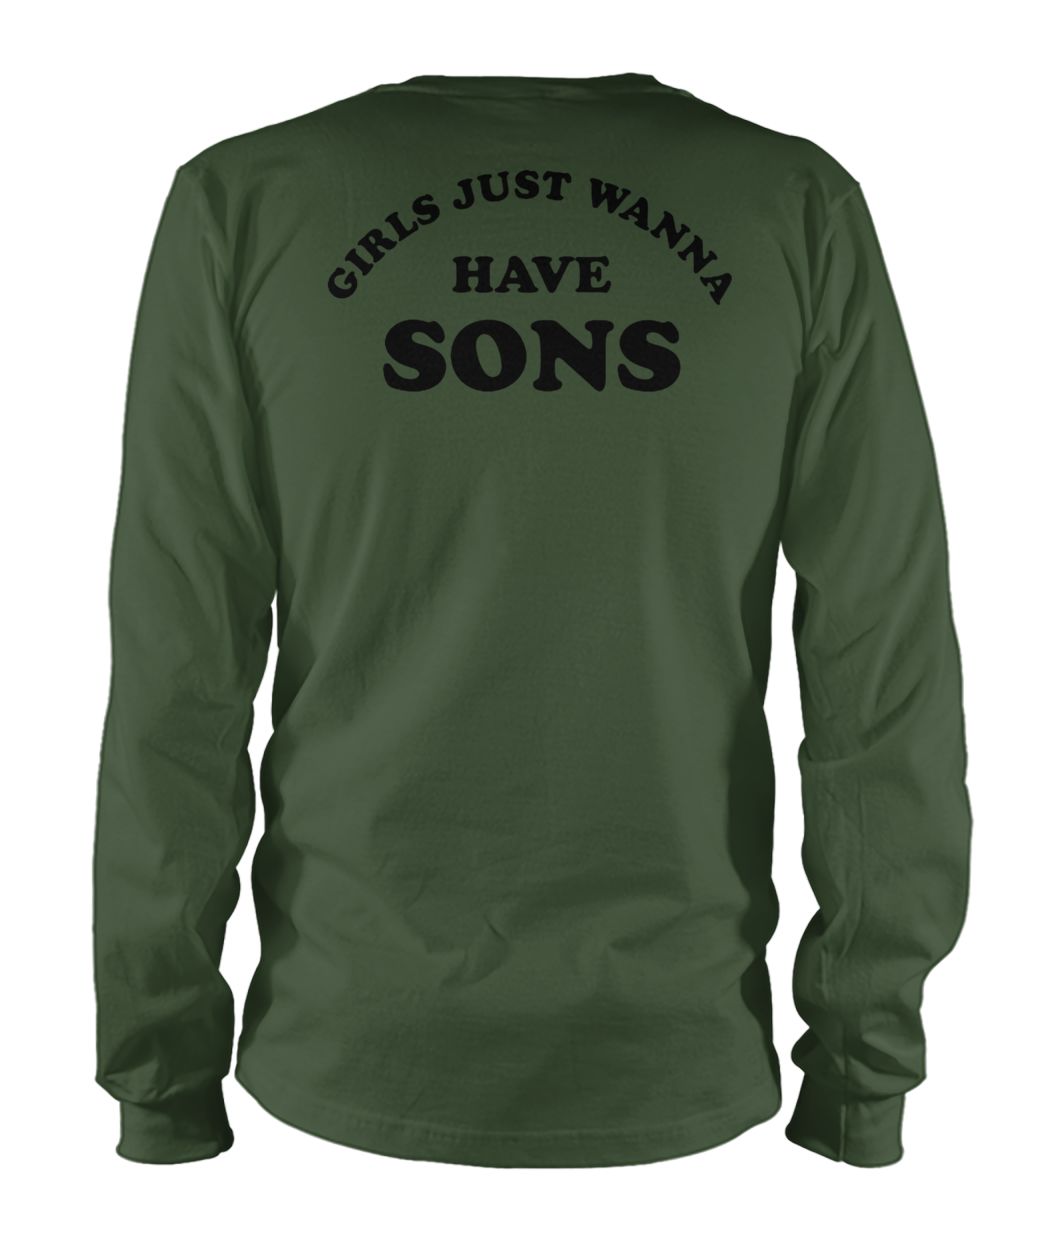 Girls just wanna have sons unisex long sleeve